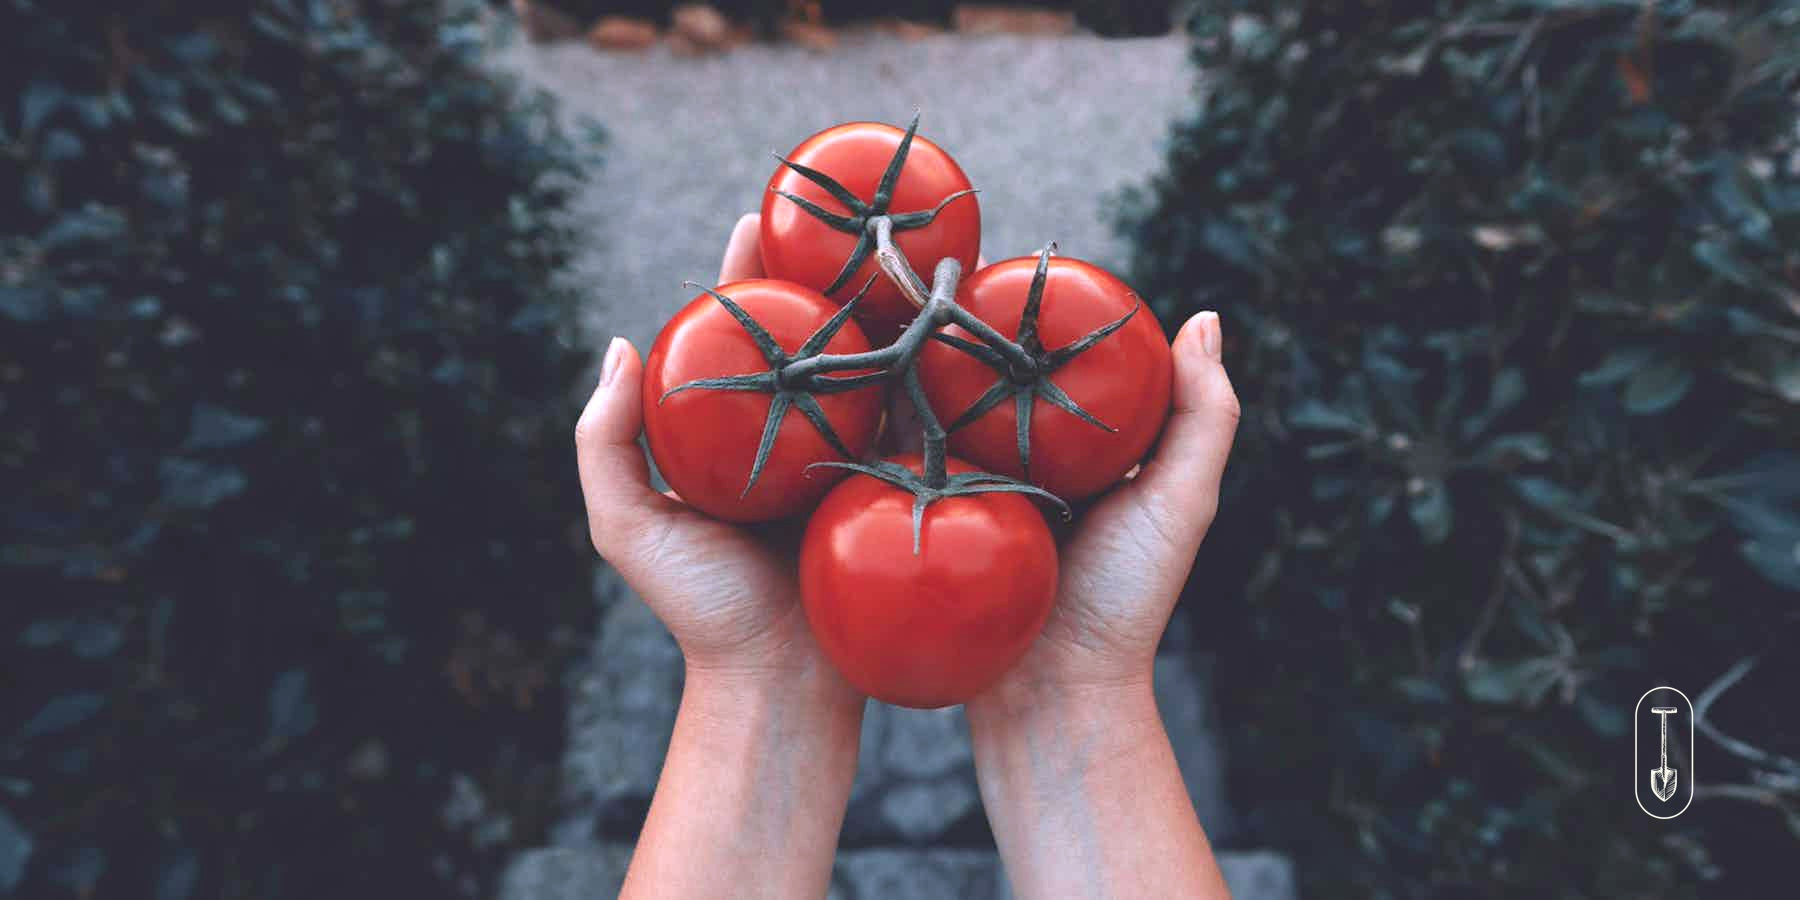 files/Banner_1800x900_Tomatoes_in_Hands.jpg